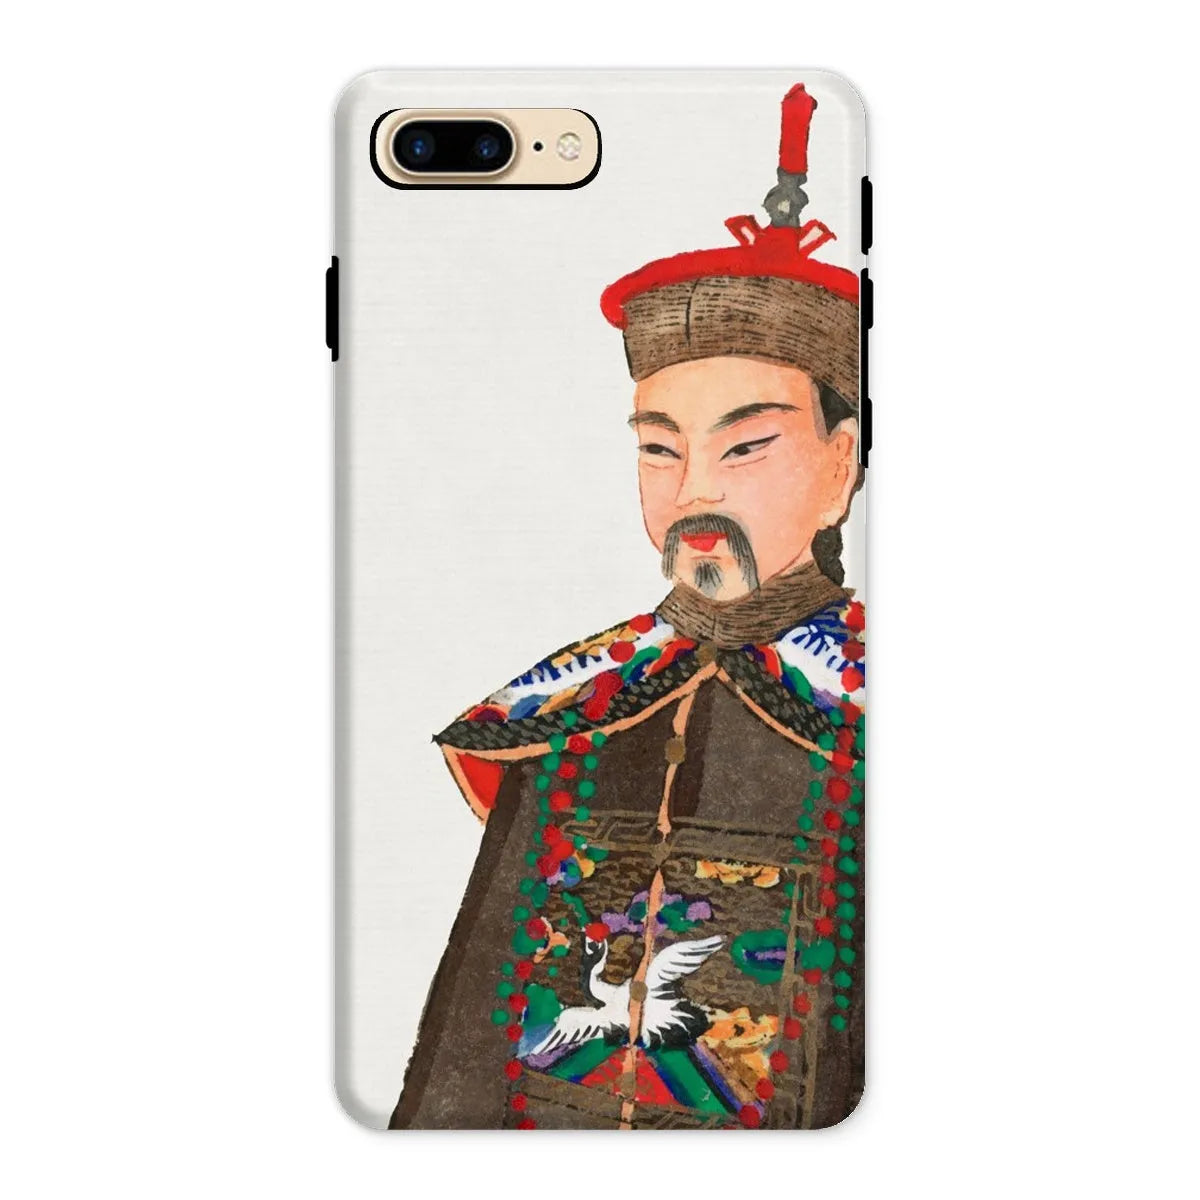 Nobleman At Court - Chinese Aesthetic Manchu Art Phone Case - Iphone 8 Plus / Matte - Mobile Phone Cases - Aesthetic Art